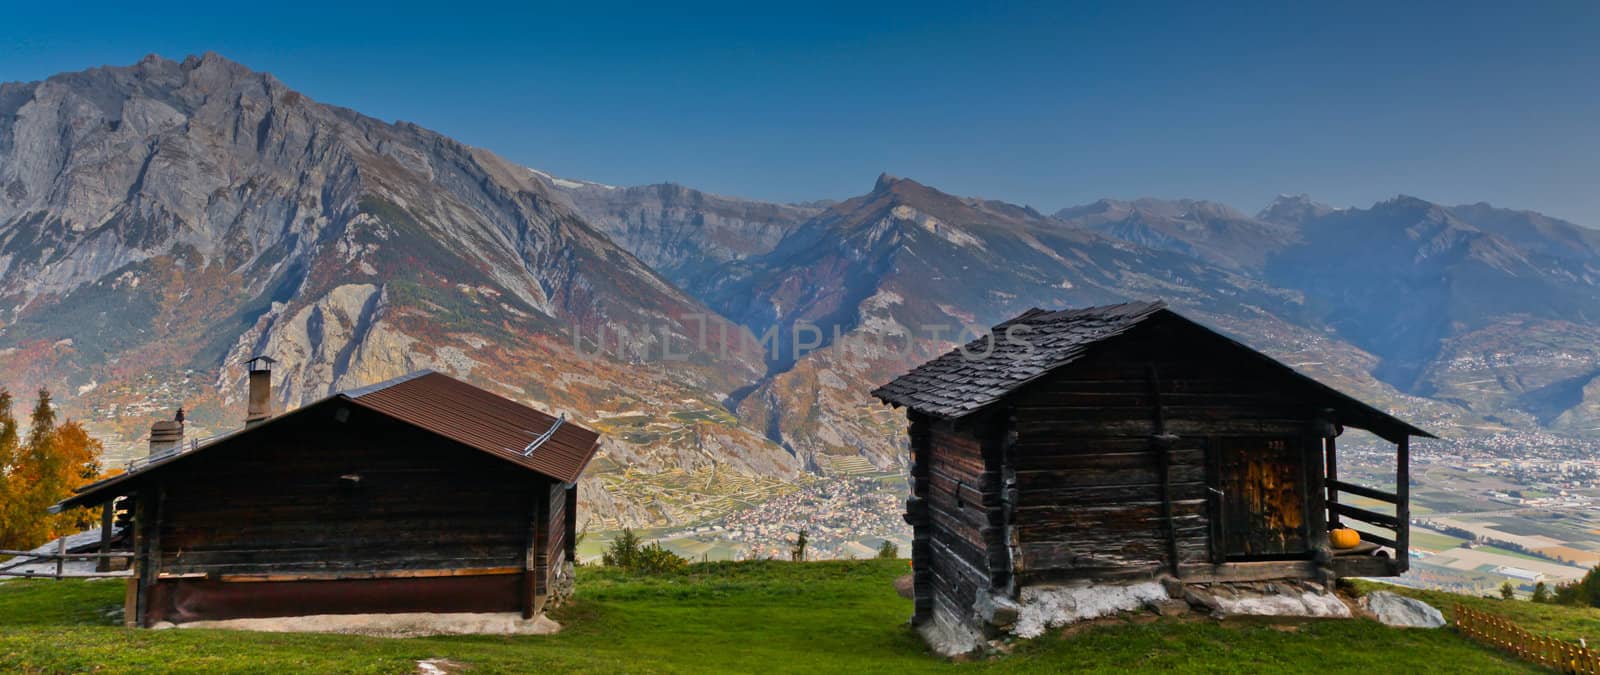 A couple of huts with Swiss Alps as background